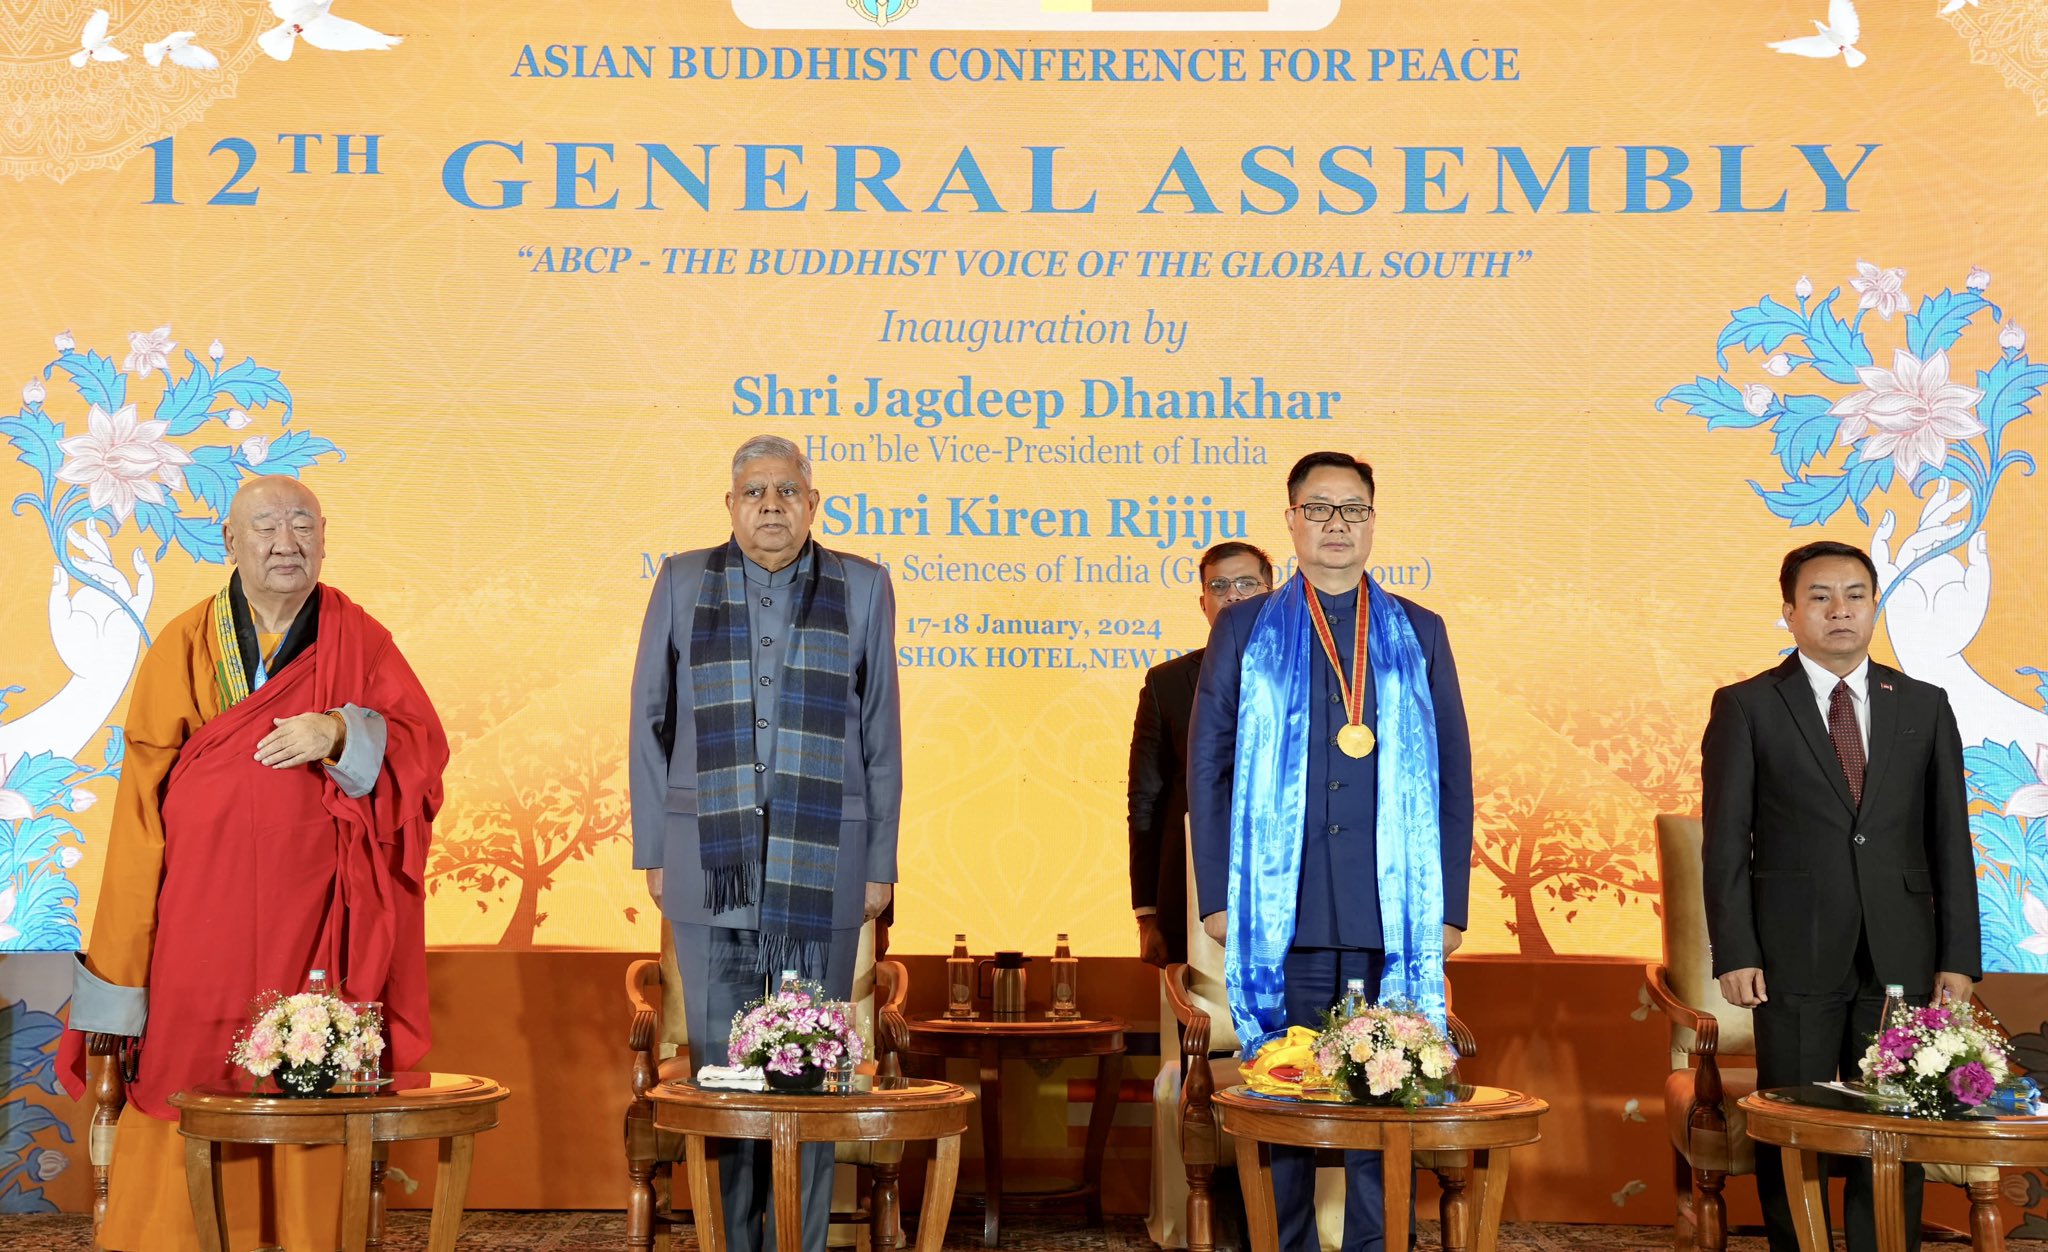 SansadTV on X: "VP Jagdeep Dhankhar inaugurated the 12th General Assembly  of the Asian Buddhist Conference for Peace (ABCP) in New Delhi today.  President of ABCP Most Ven. Gabji Demberel Choijamts &